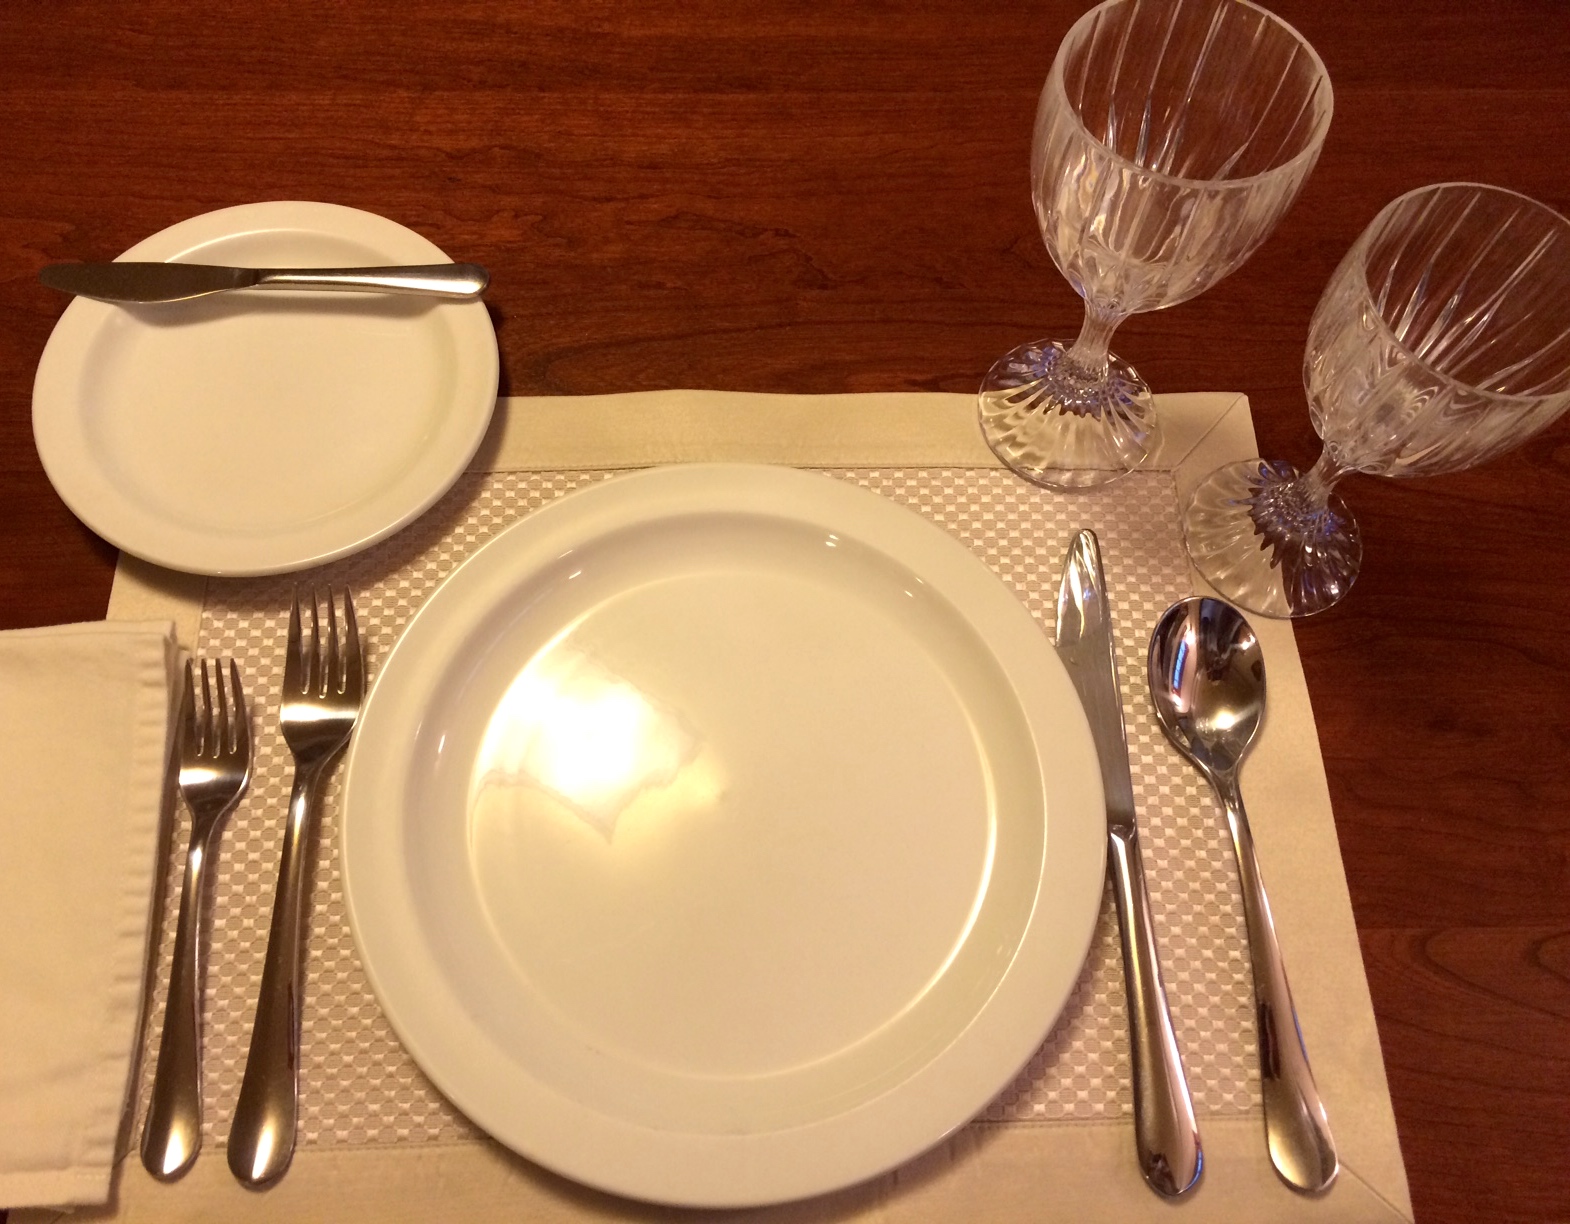 Three-course Place Setting